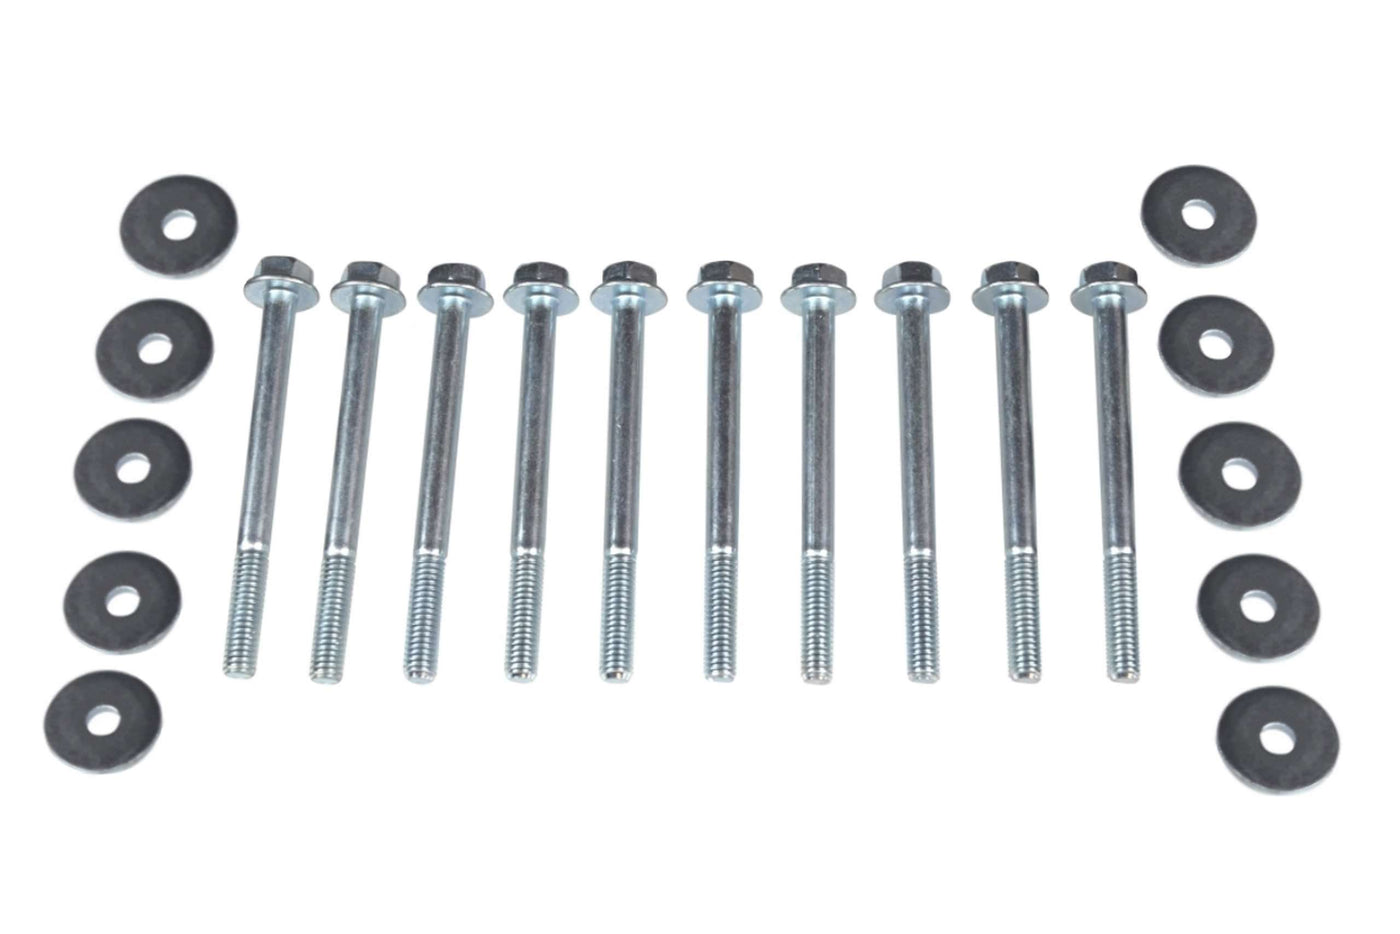 Bolts and fastener sets